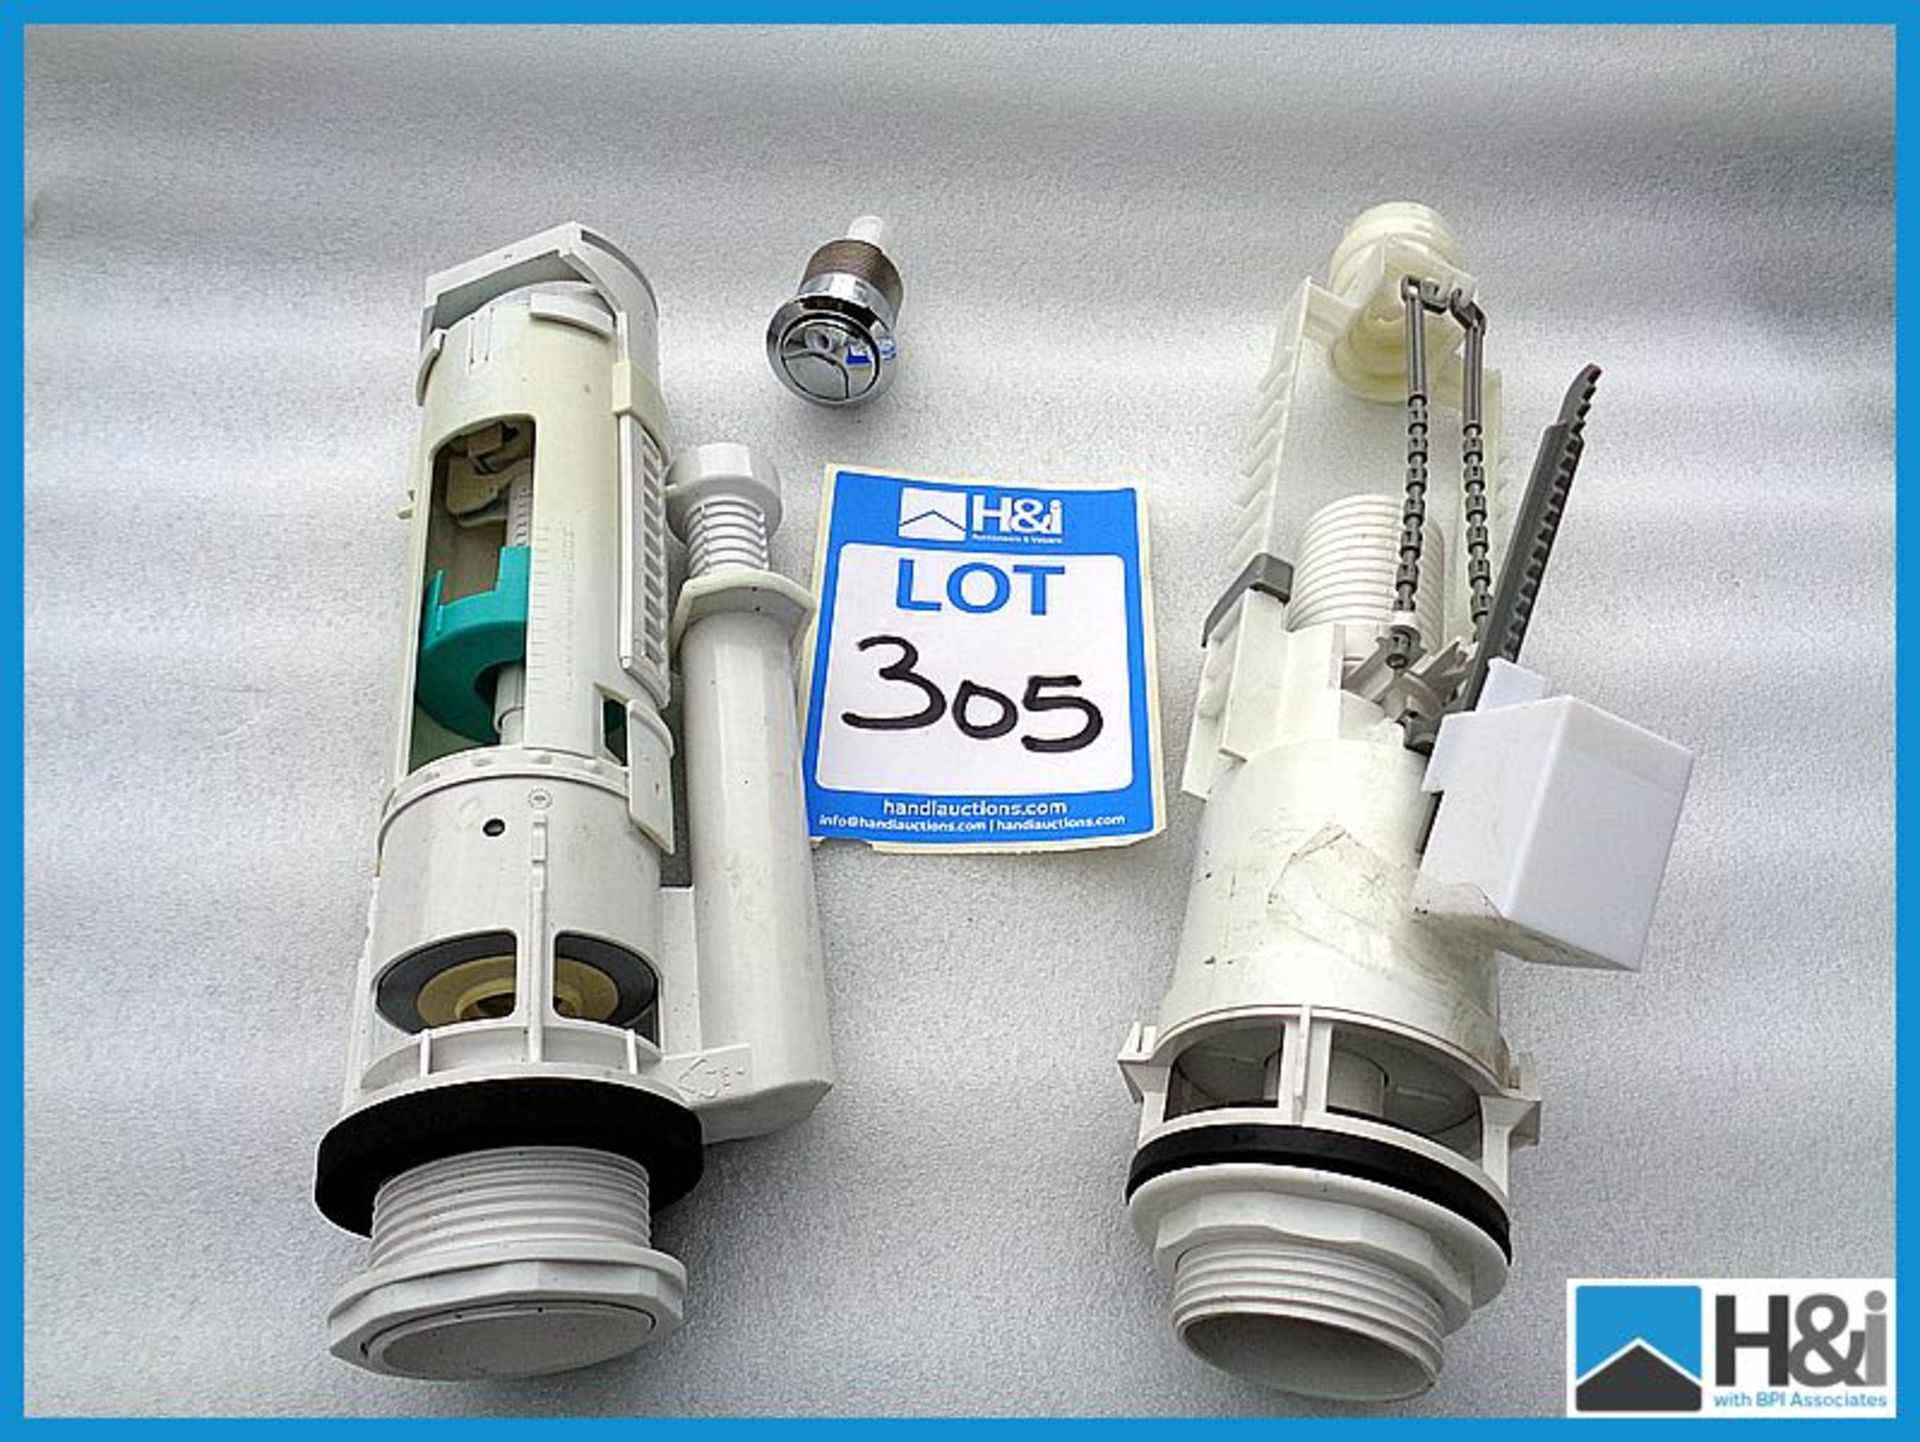 2 x drop wc syphon valves Appraisal: Good Serial No: NA Location: H&I, The Auction House,